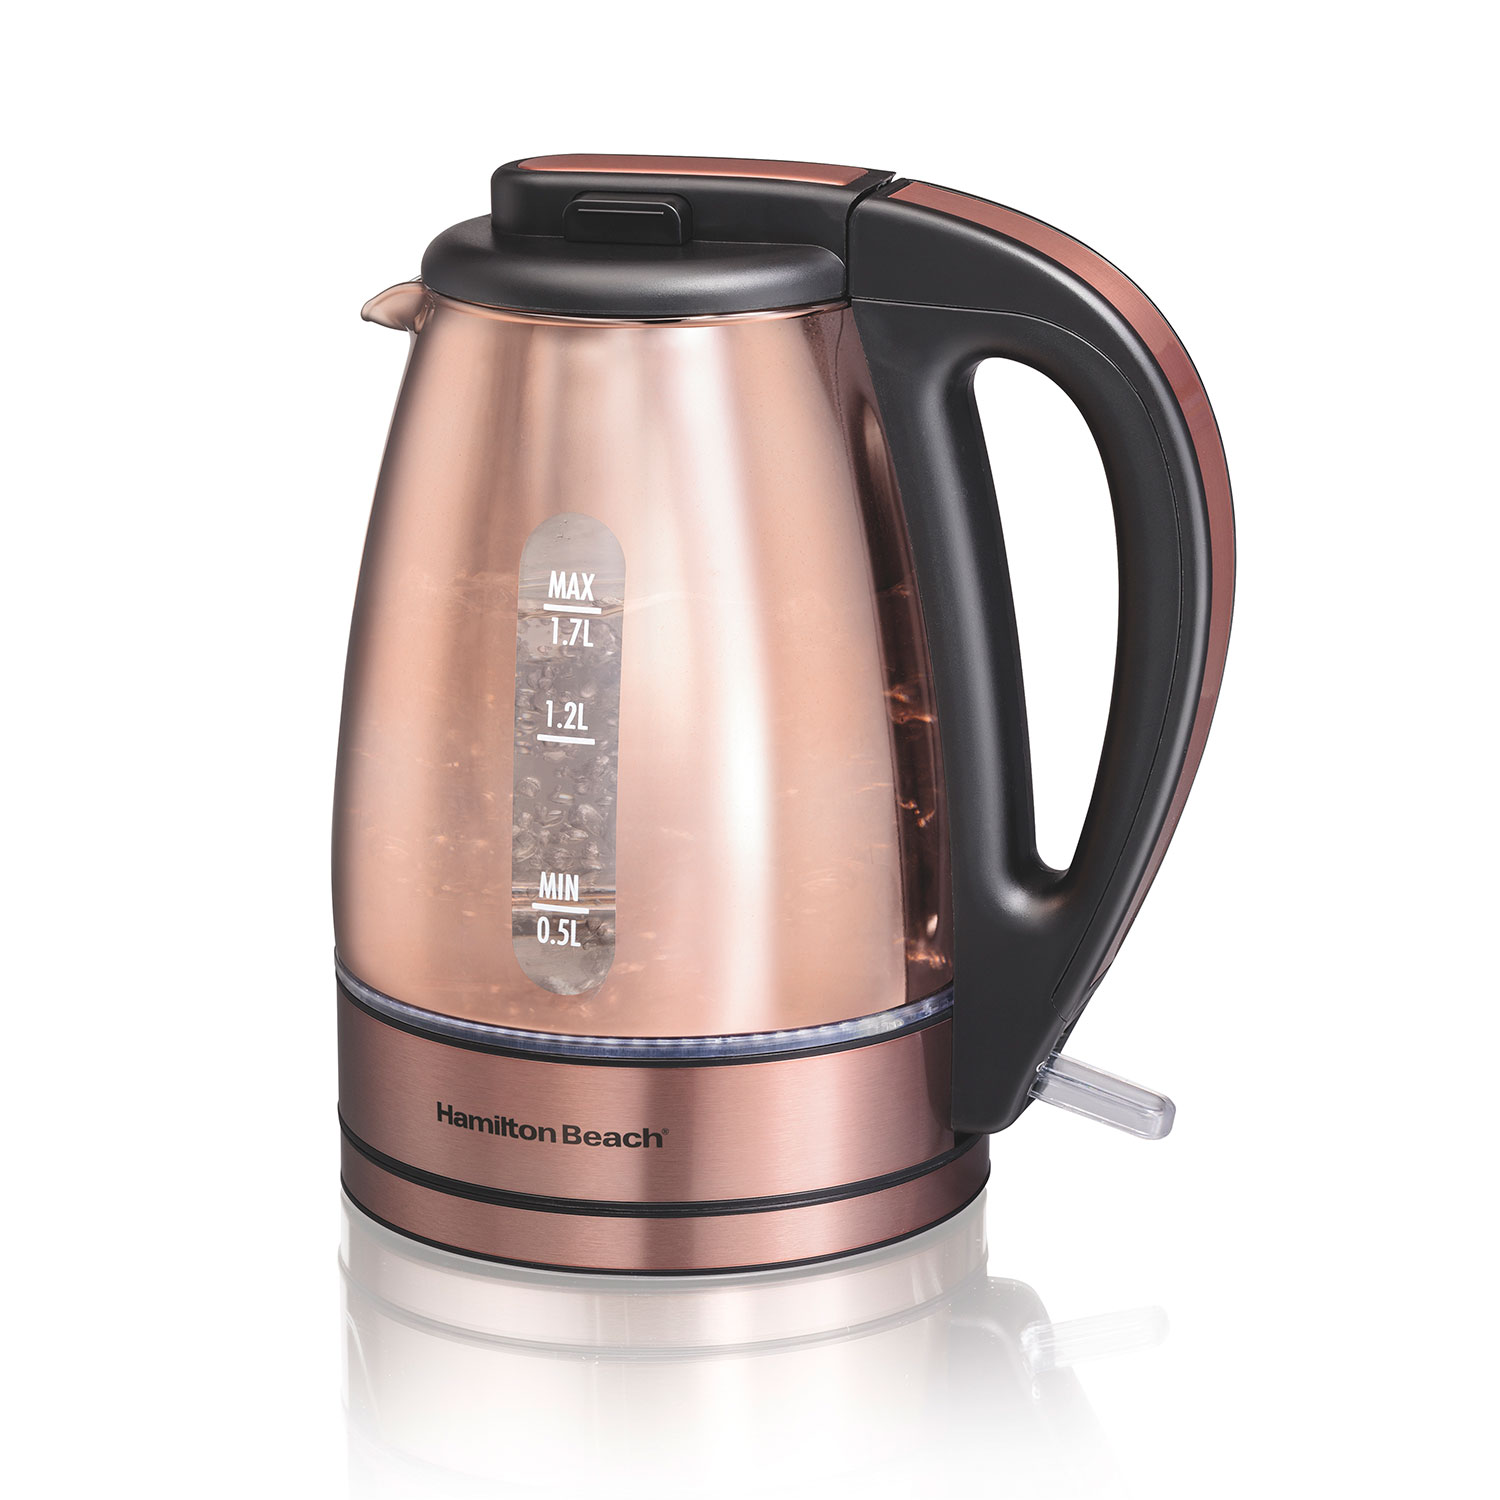 Recertified Glass & Stainless Steel with Copper Finish Kettle (R40866)